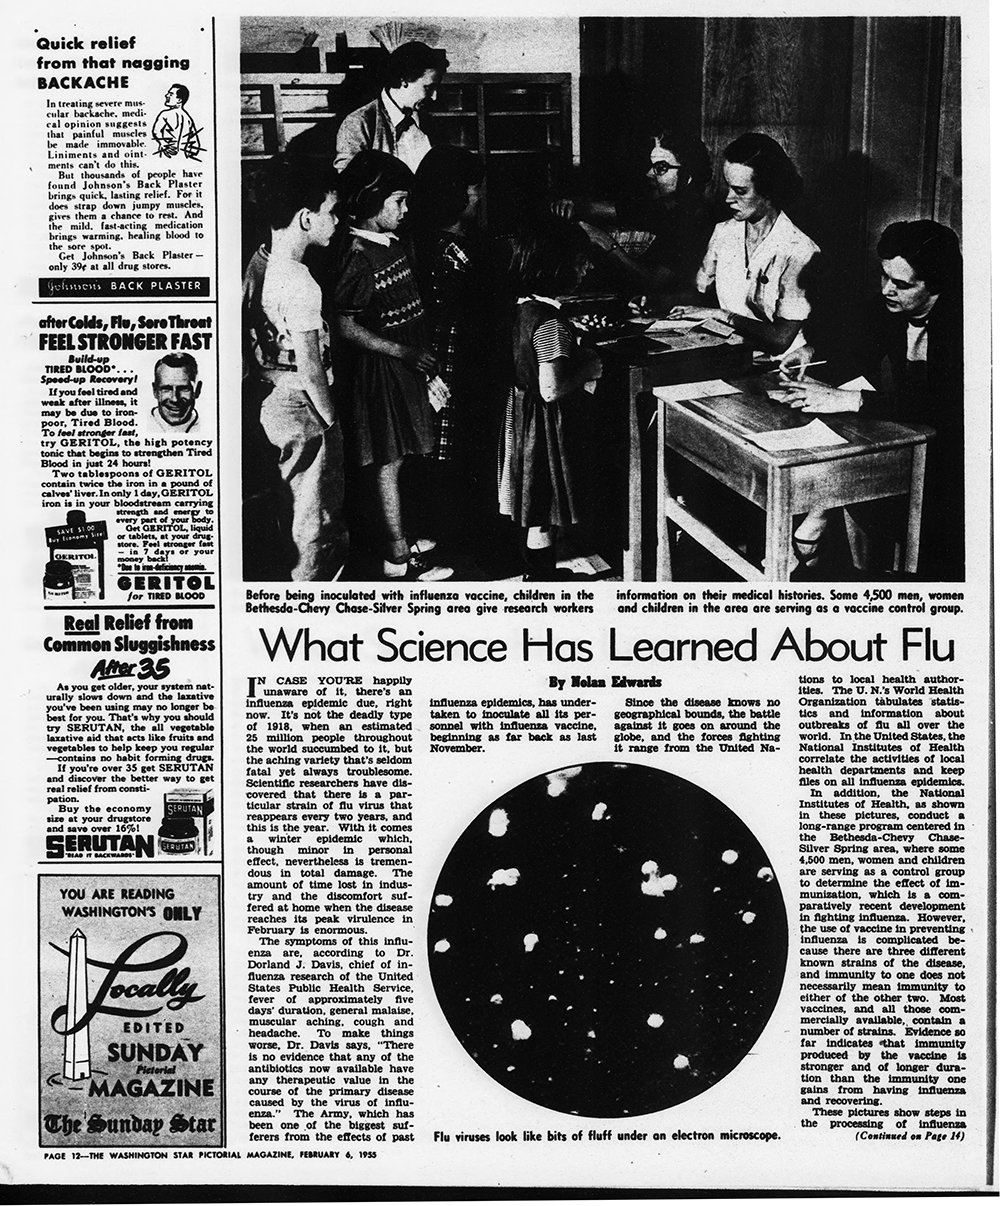 This article, “What Science Has Learned About Flu,” was published in 1955,